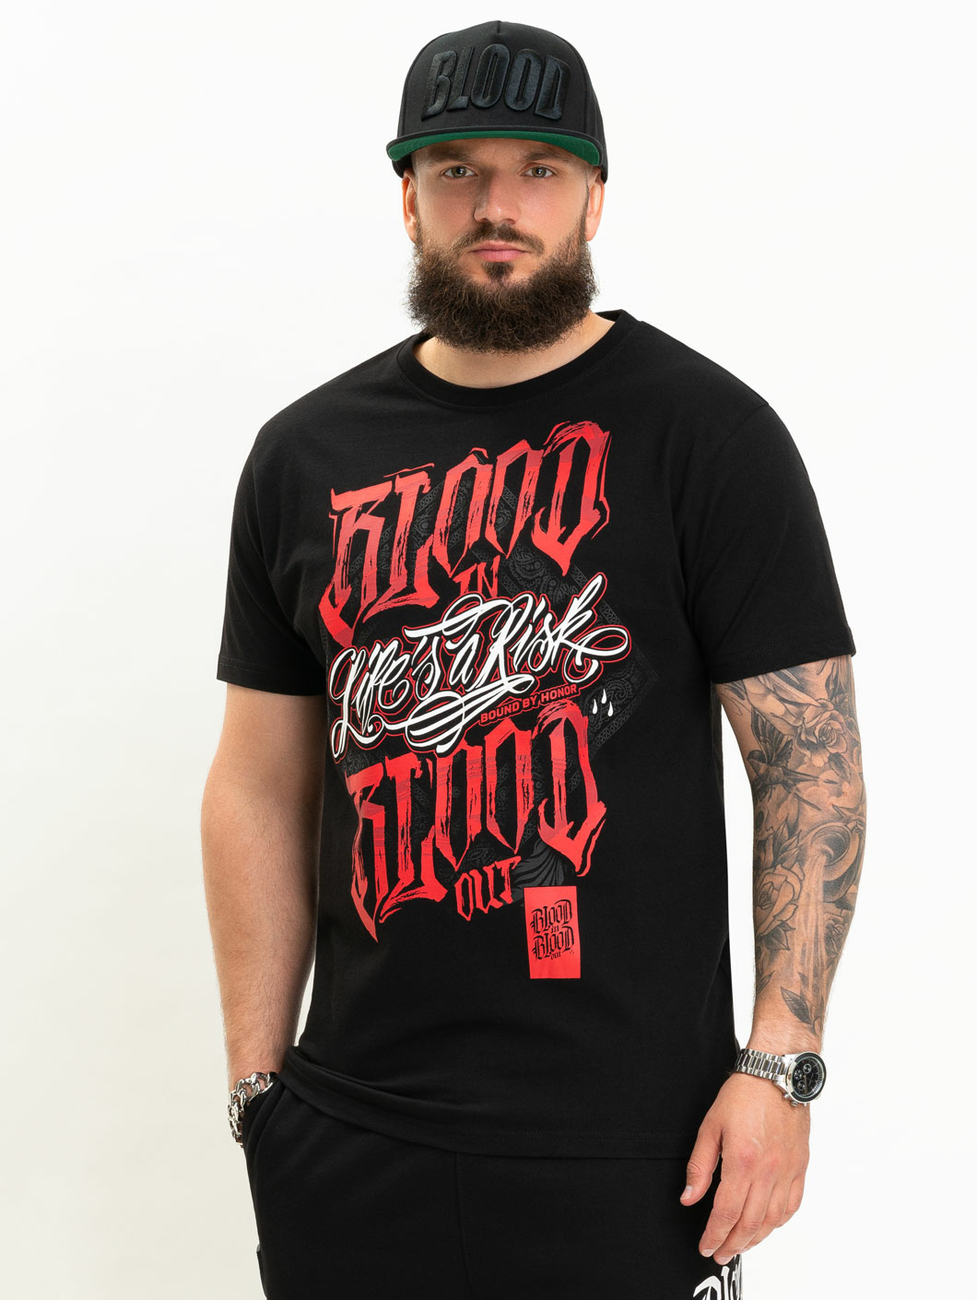 Blood In Blood Out Cadenaro T-Shirt S